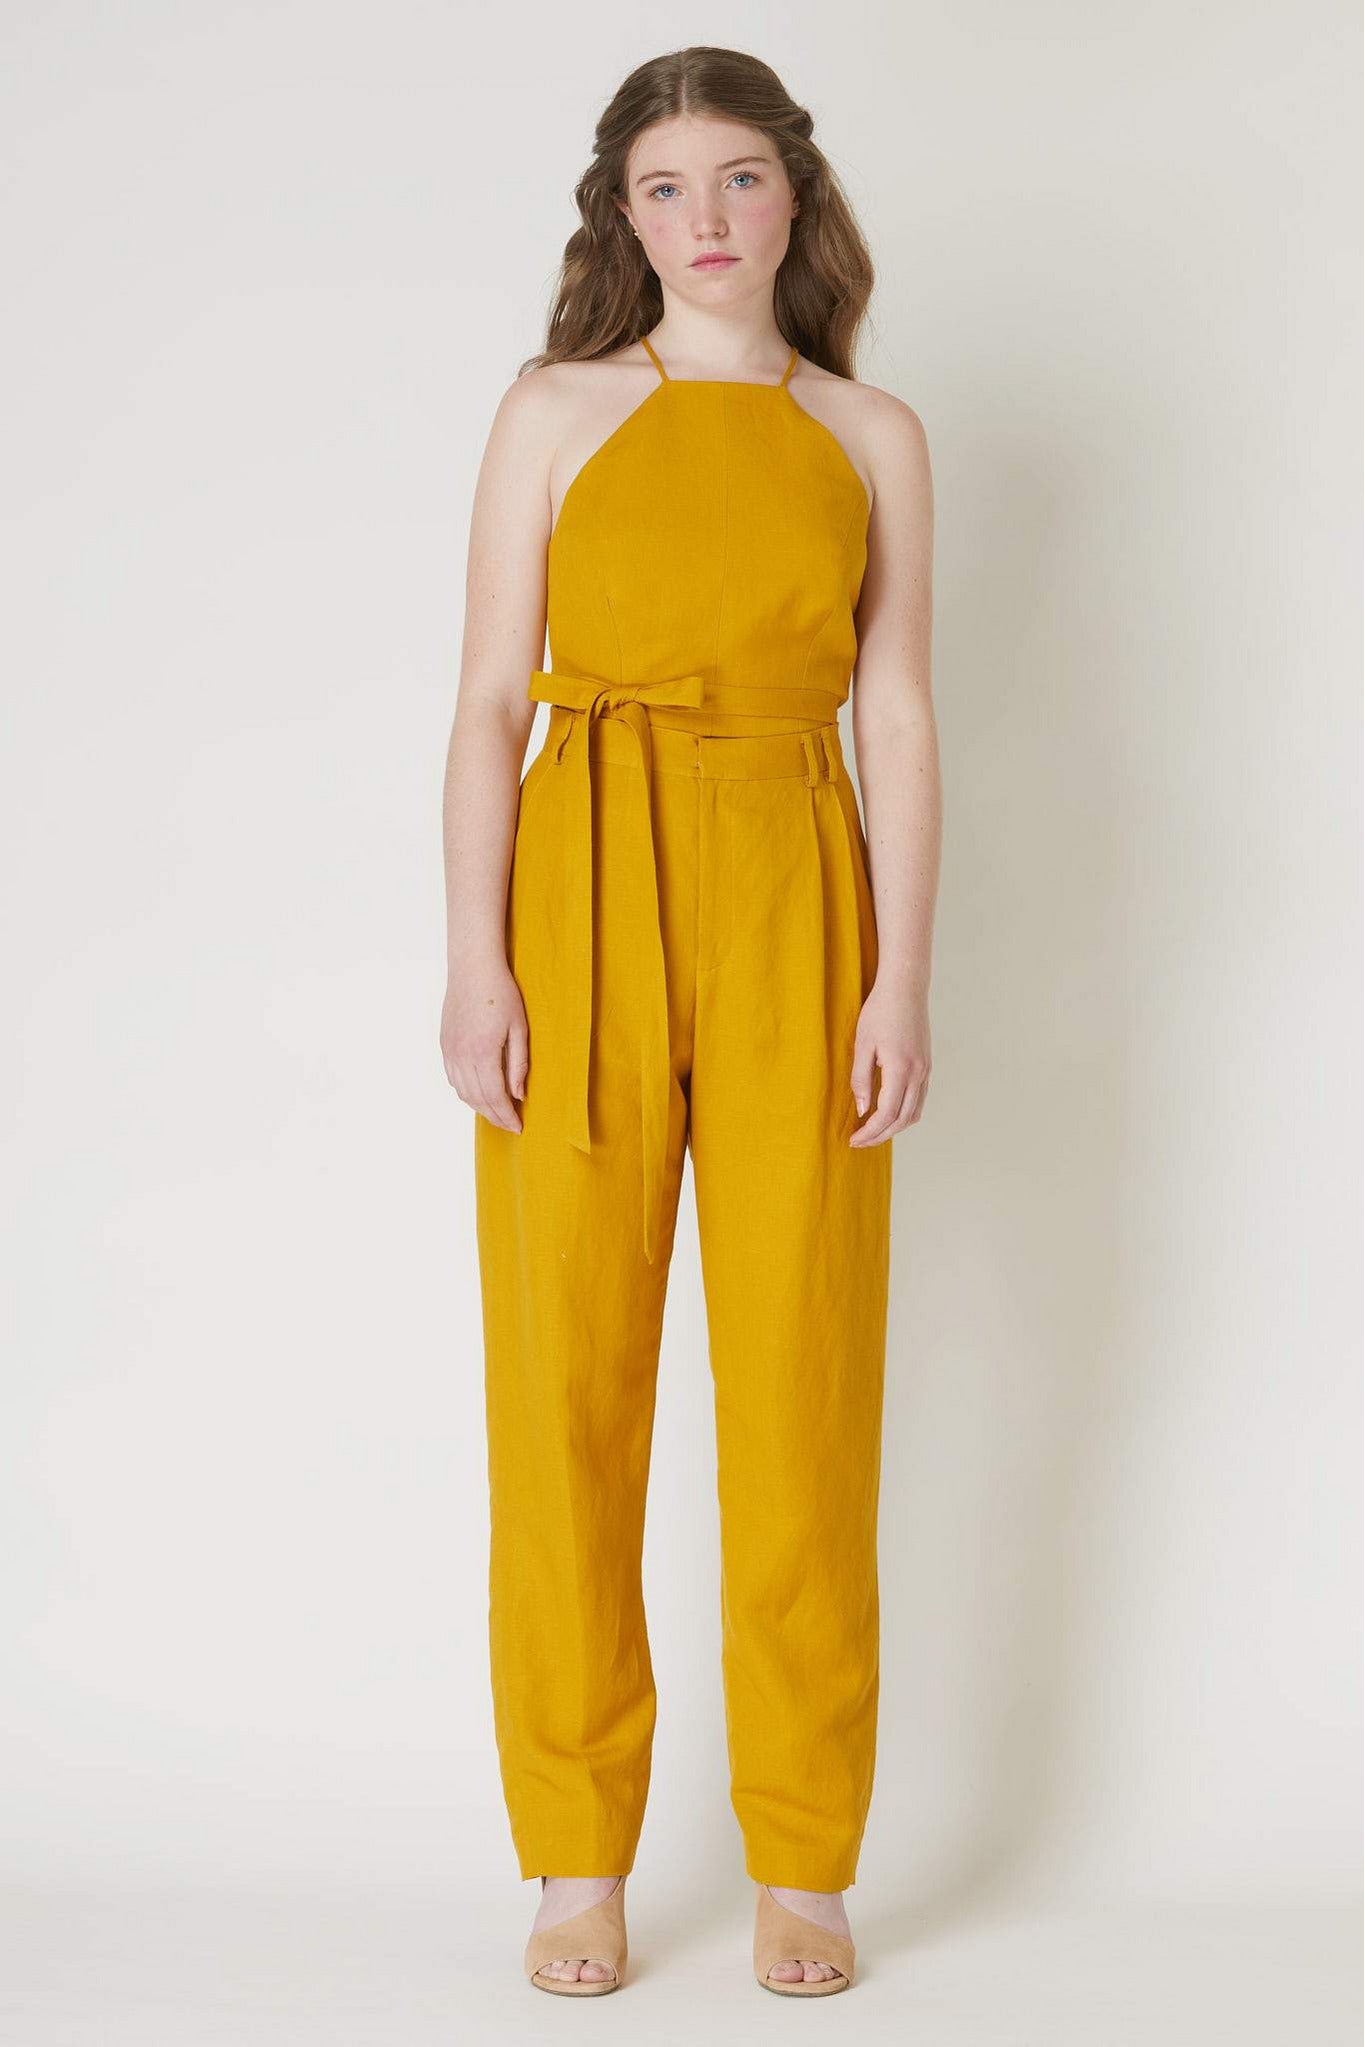 Thy-Lan Top in Solid Linen Tops CHRISTINE ALCALAY Marigold X-Small 